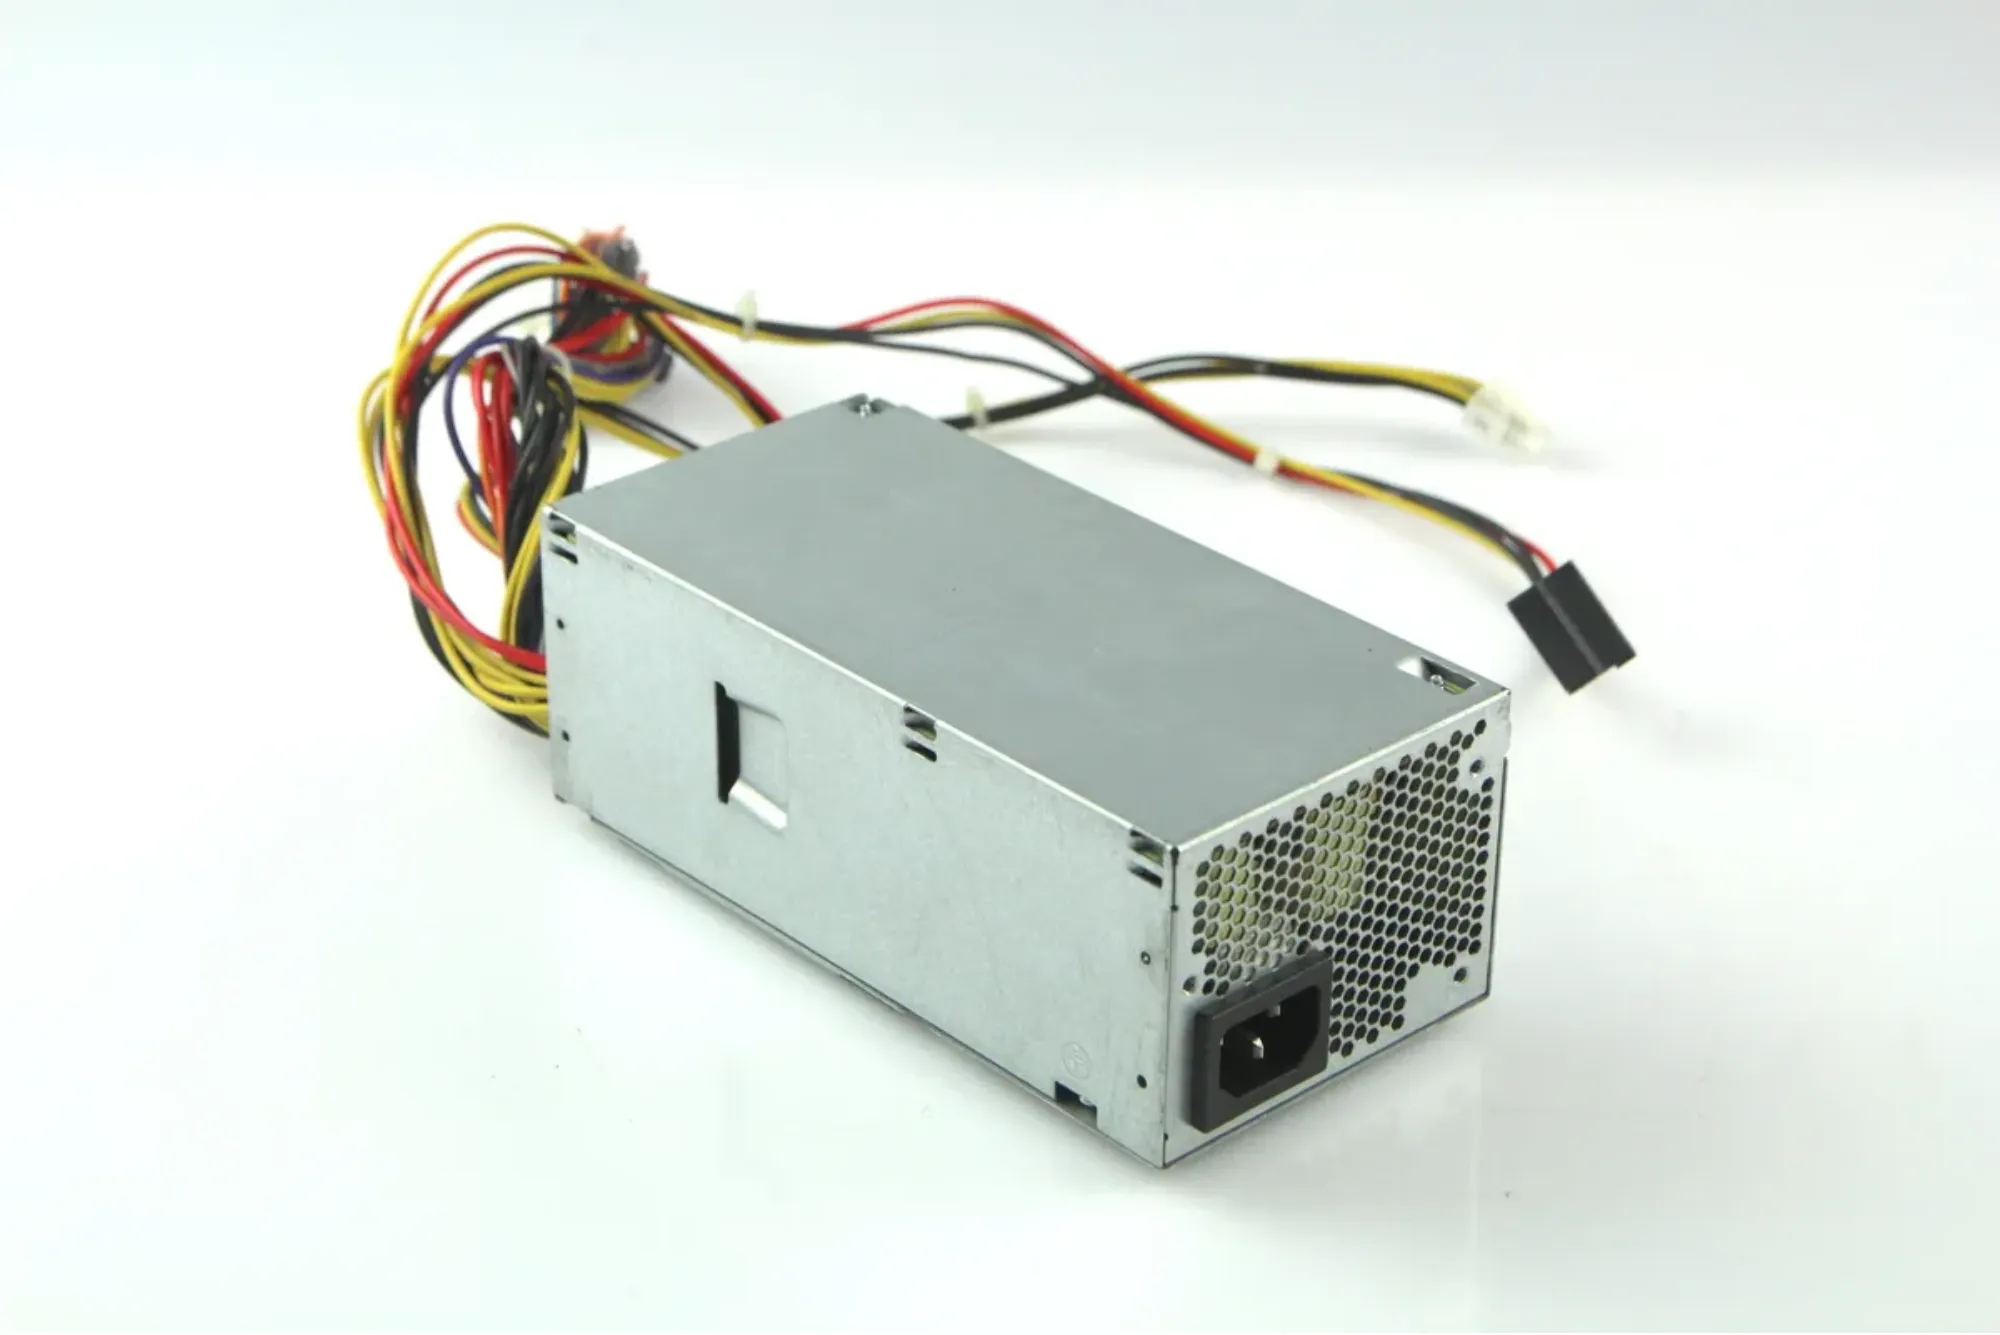 Why Huntkey Is Favored Over Other Manufacturers of DC Power Supplies